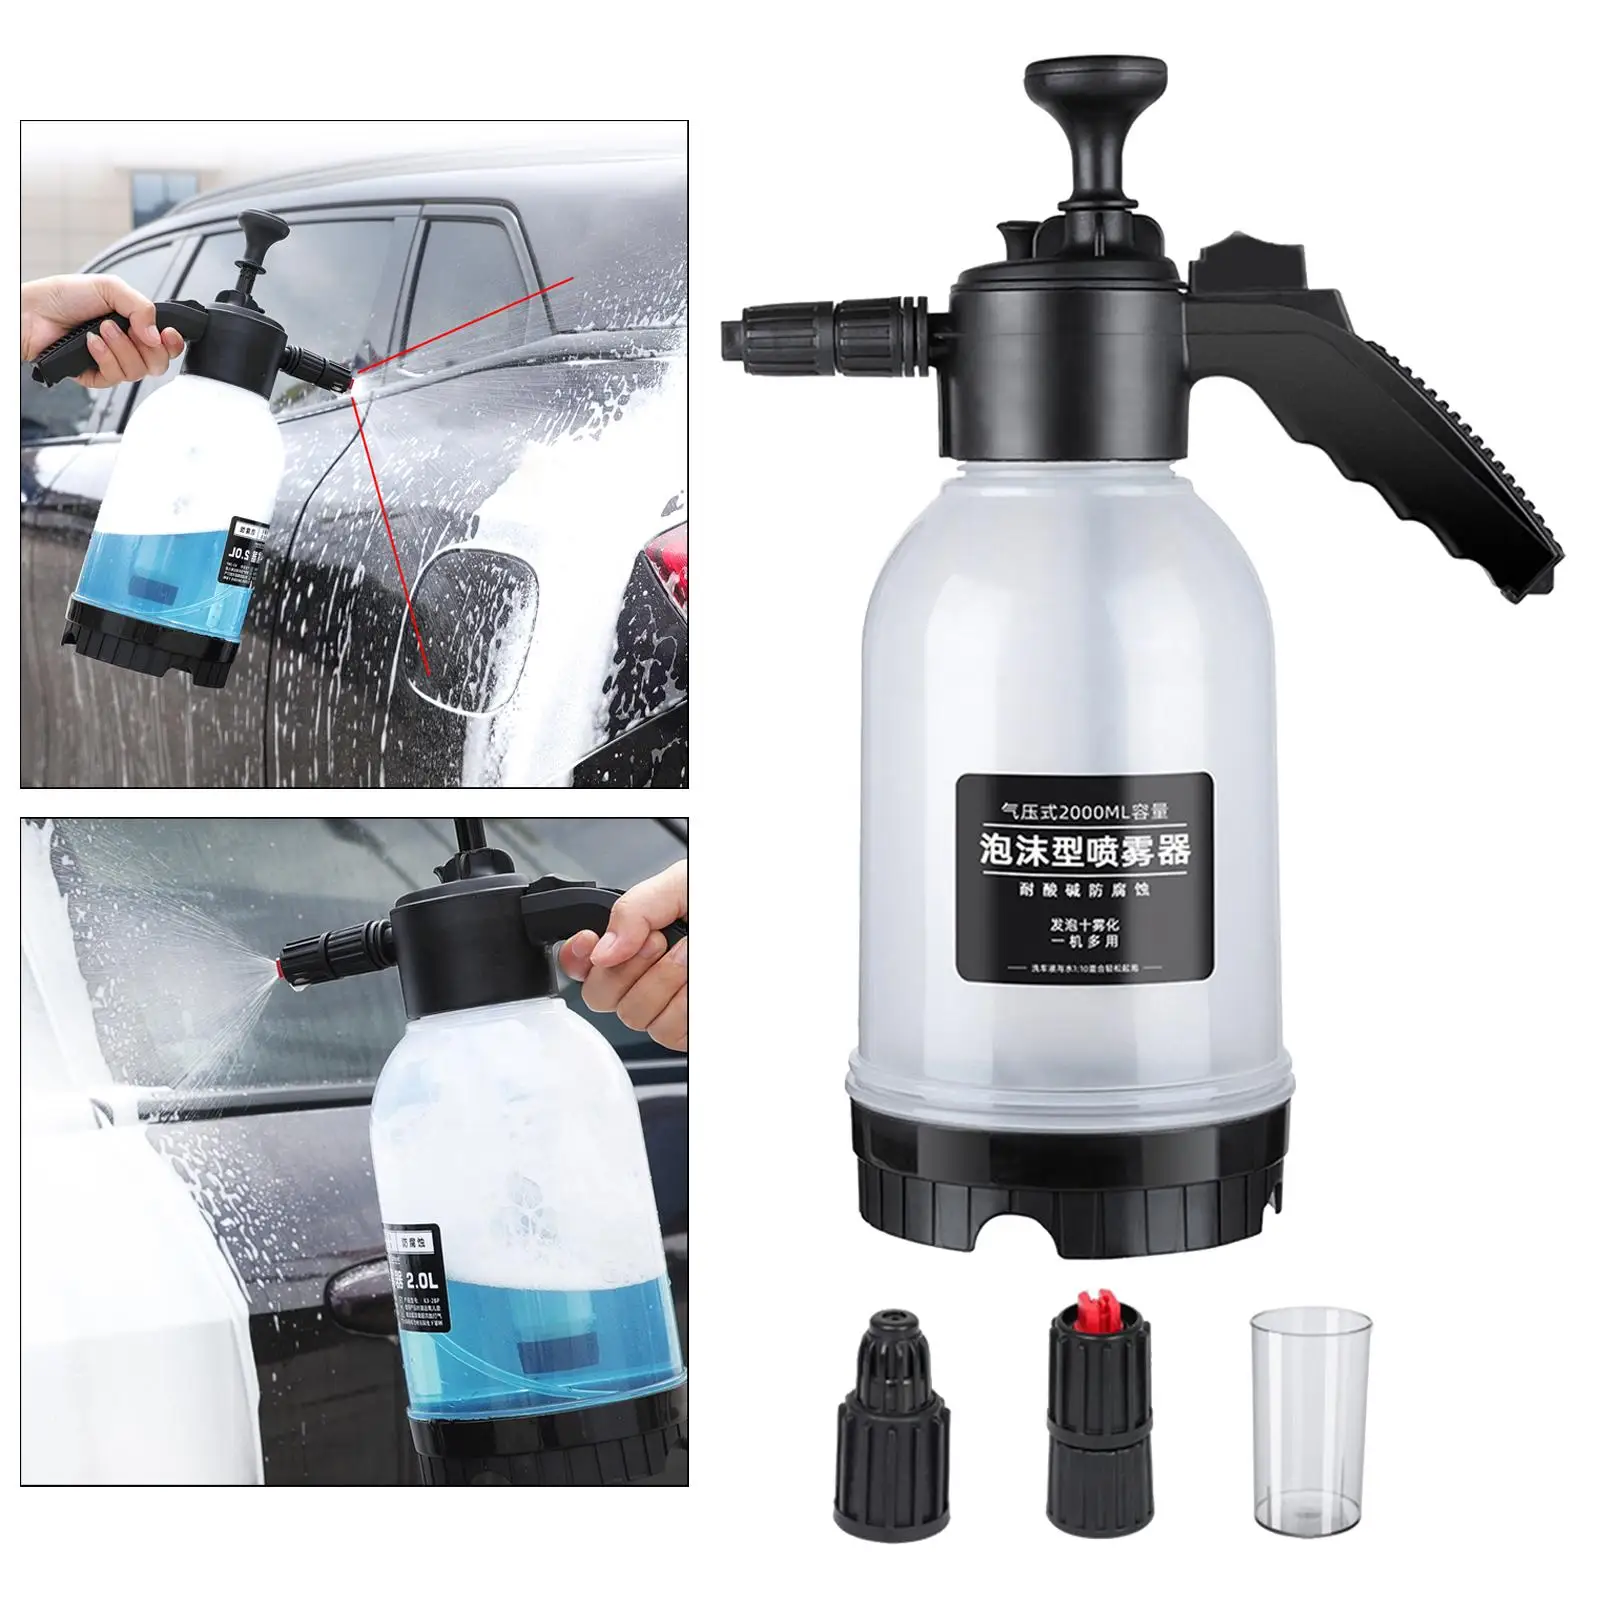 Hand Held Car Wash Pump Manual Foaming Sprayer 2000ml Adjustable Nozzle Hand Pressurized for House Cleaning Watering